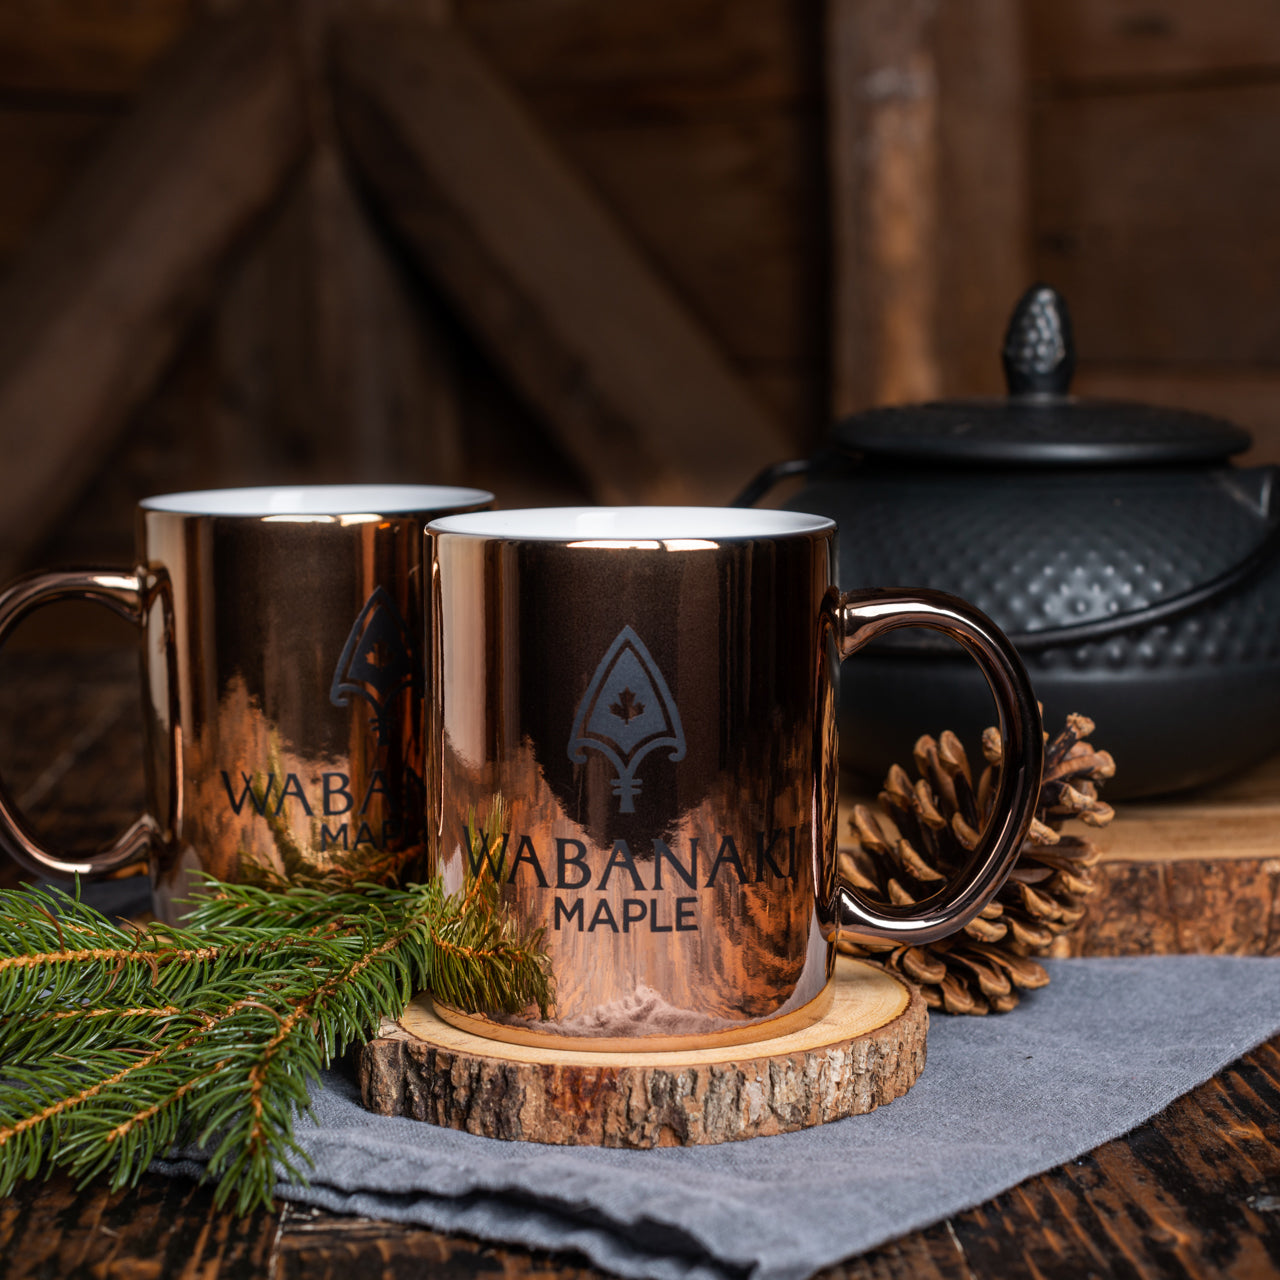 Wabanaki Maple Coffee Mug pictured with a black kettle in the background